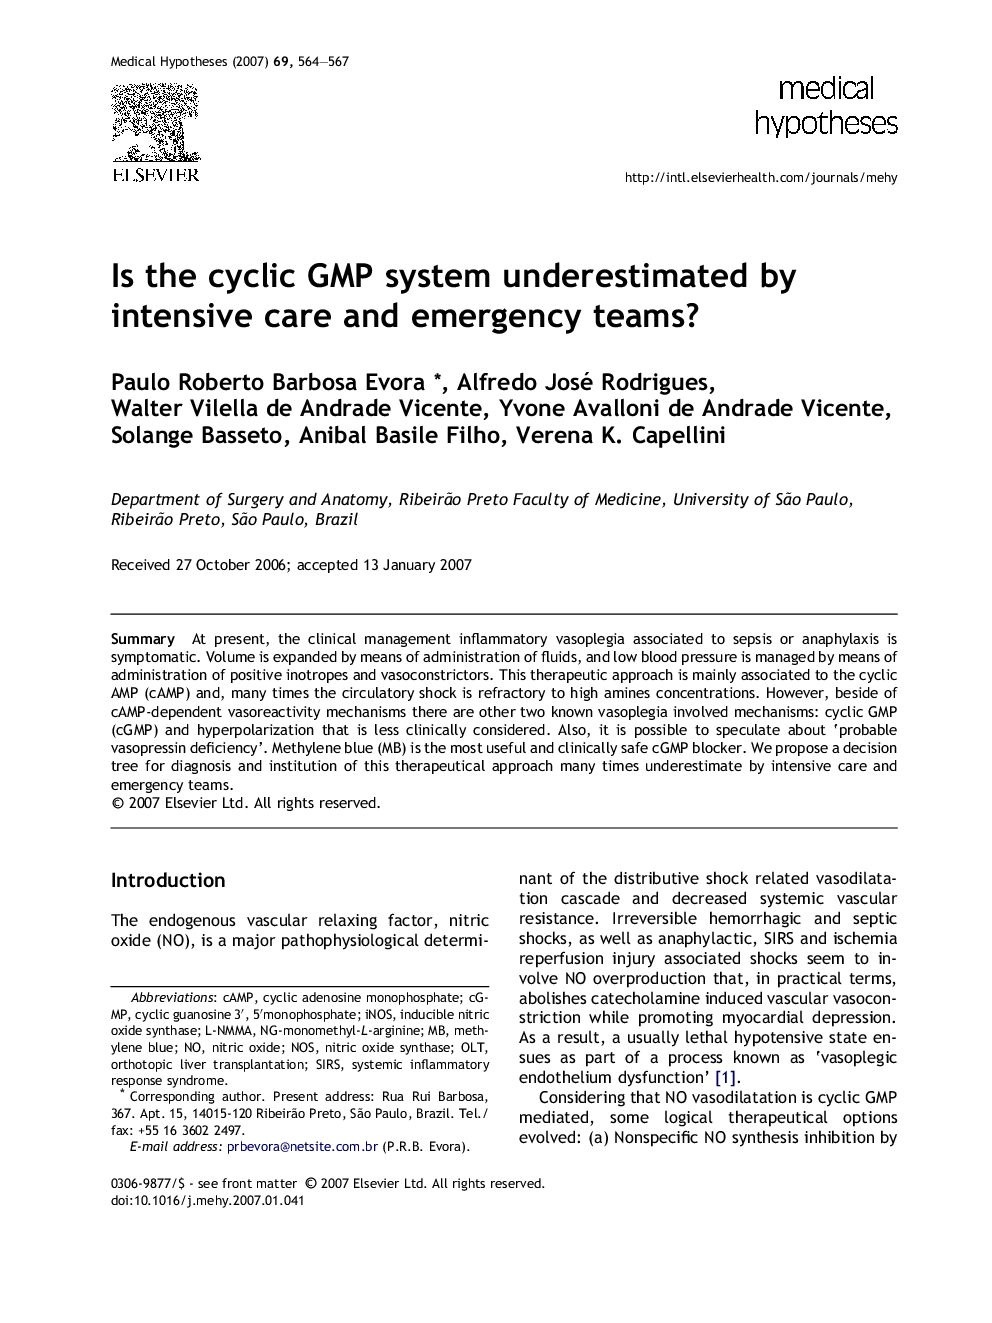 Is the cyclic GMP system underestimated by intensive care and emergency teams?